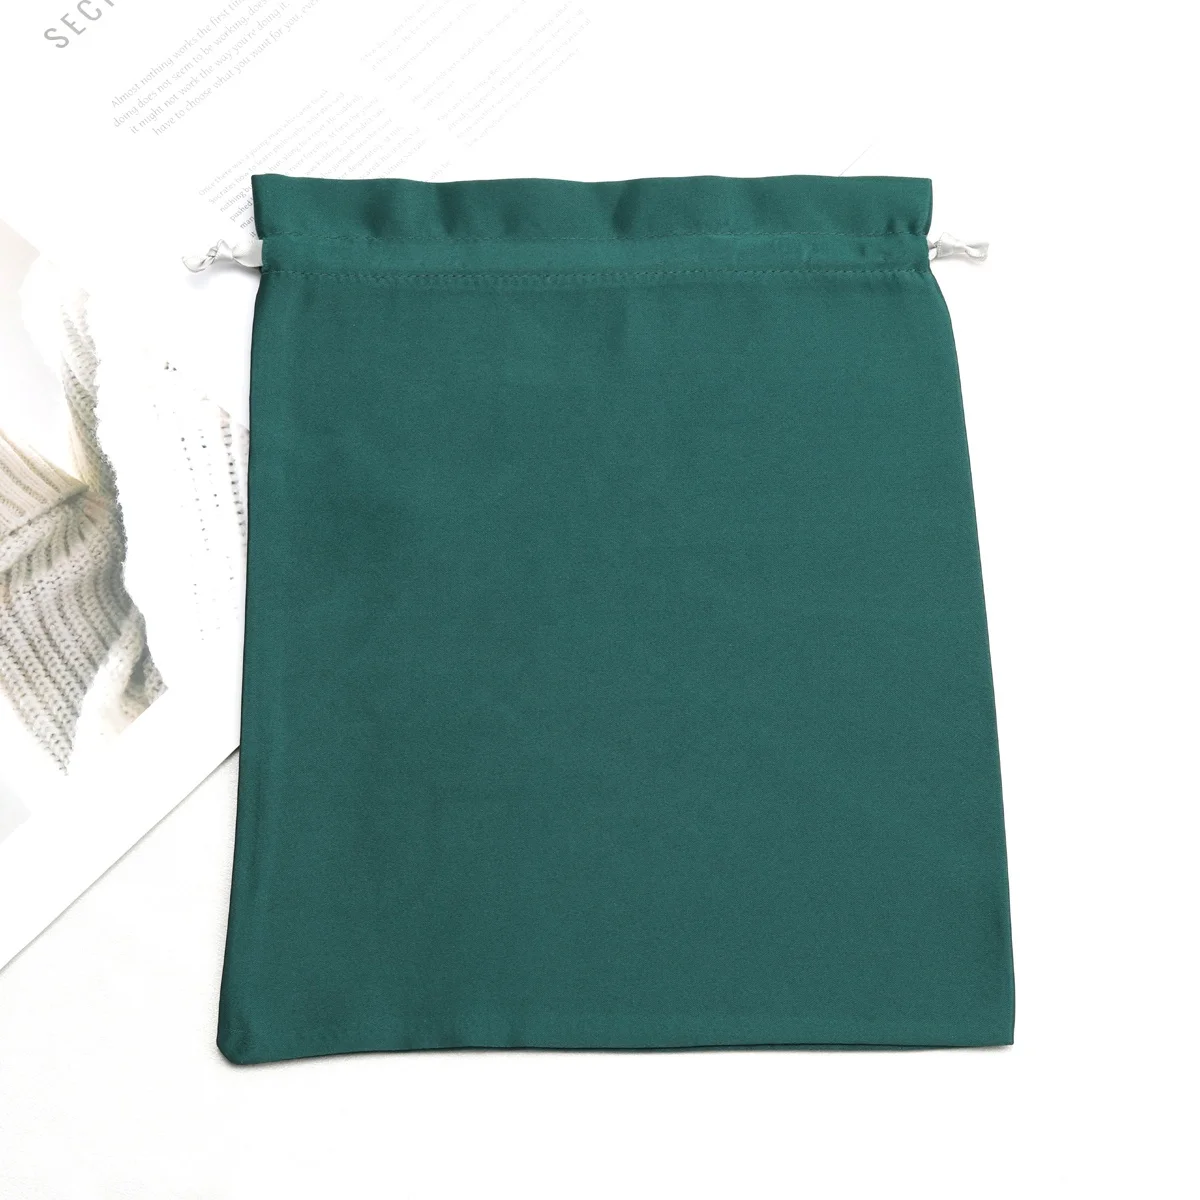 Oem Wholesale Green Satin Drawstring Lingerie Bag Luxury Hair Extension Wig Packing Storage Dust Silk Pouch